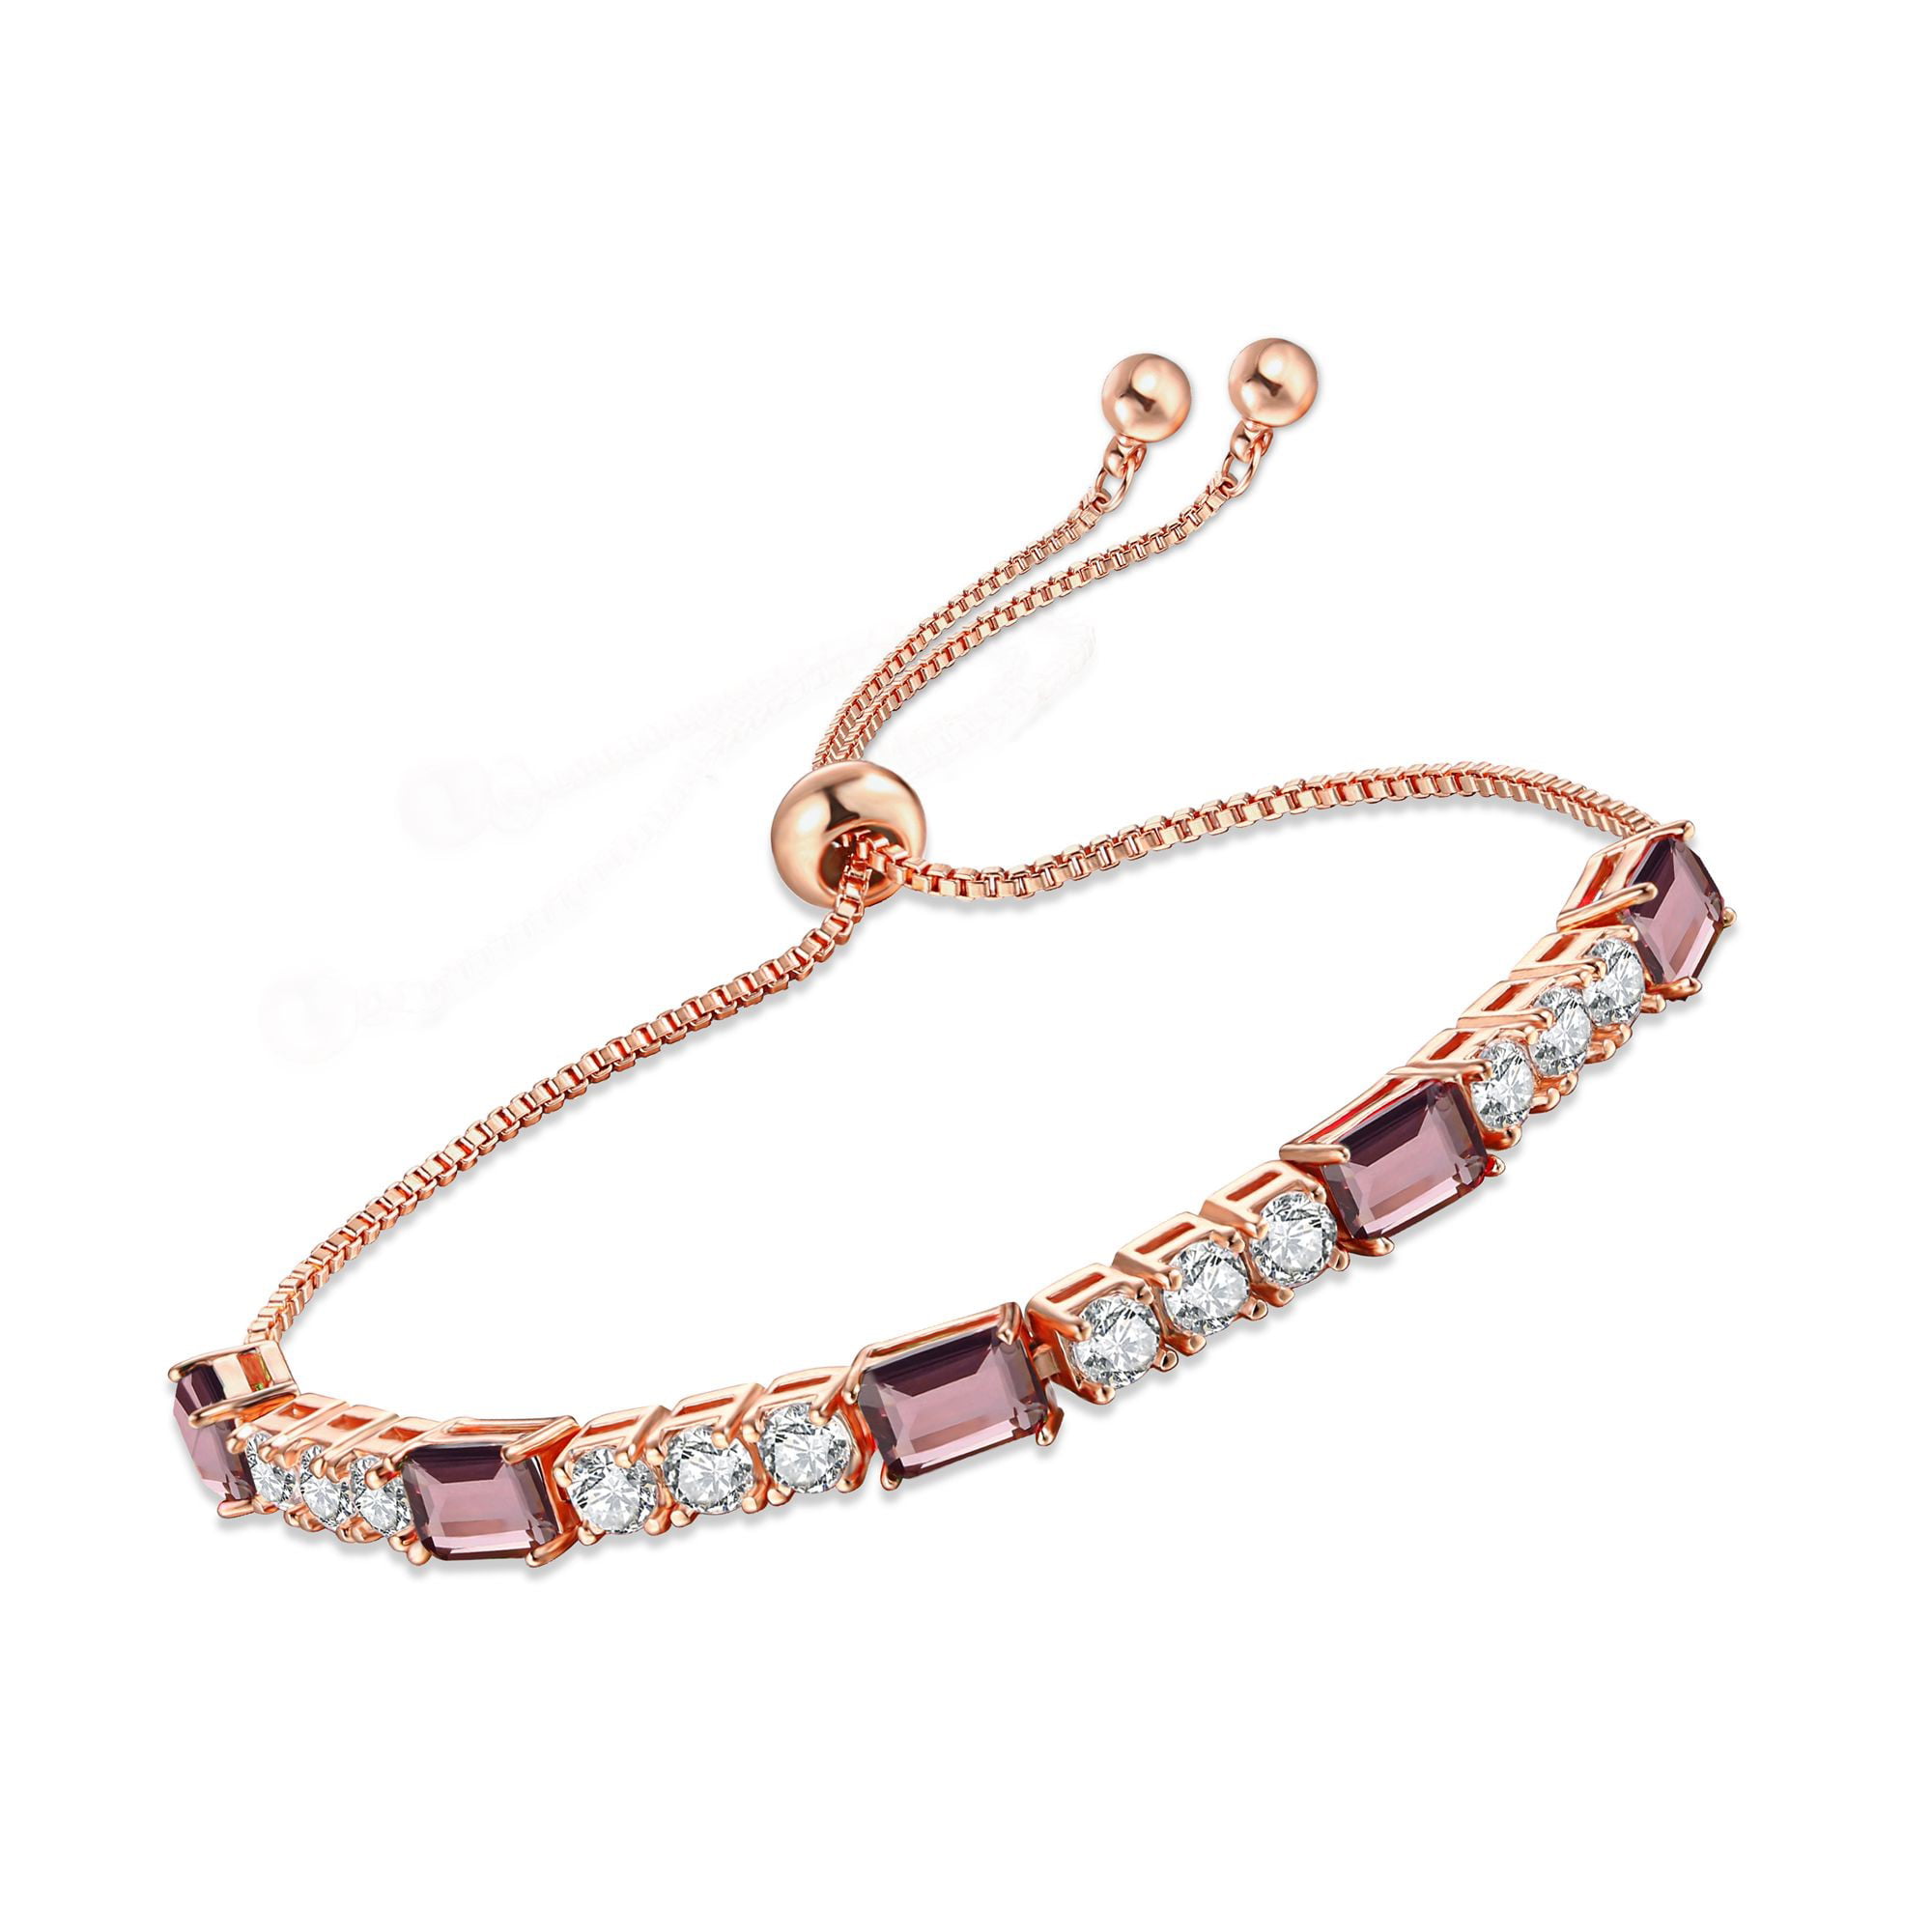 Pink beaded stone bracelet.. Rose pink quartz stone stretch bracelet created with oval cut stones in a polished smooth finish